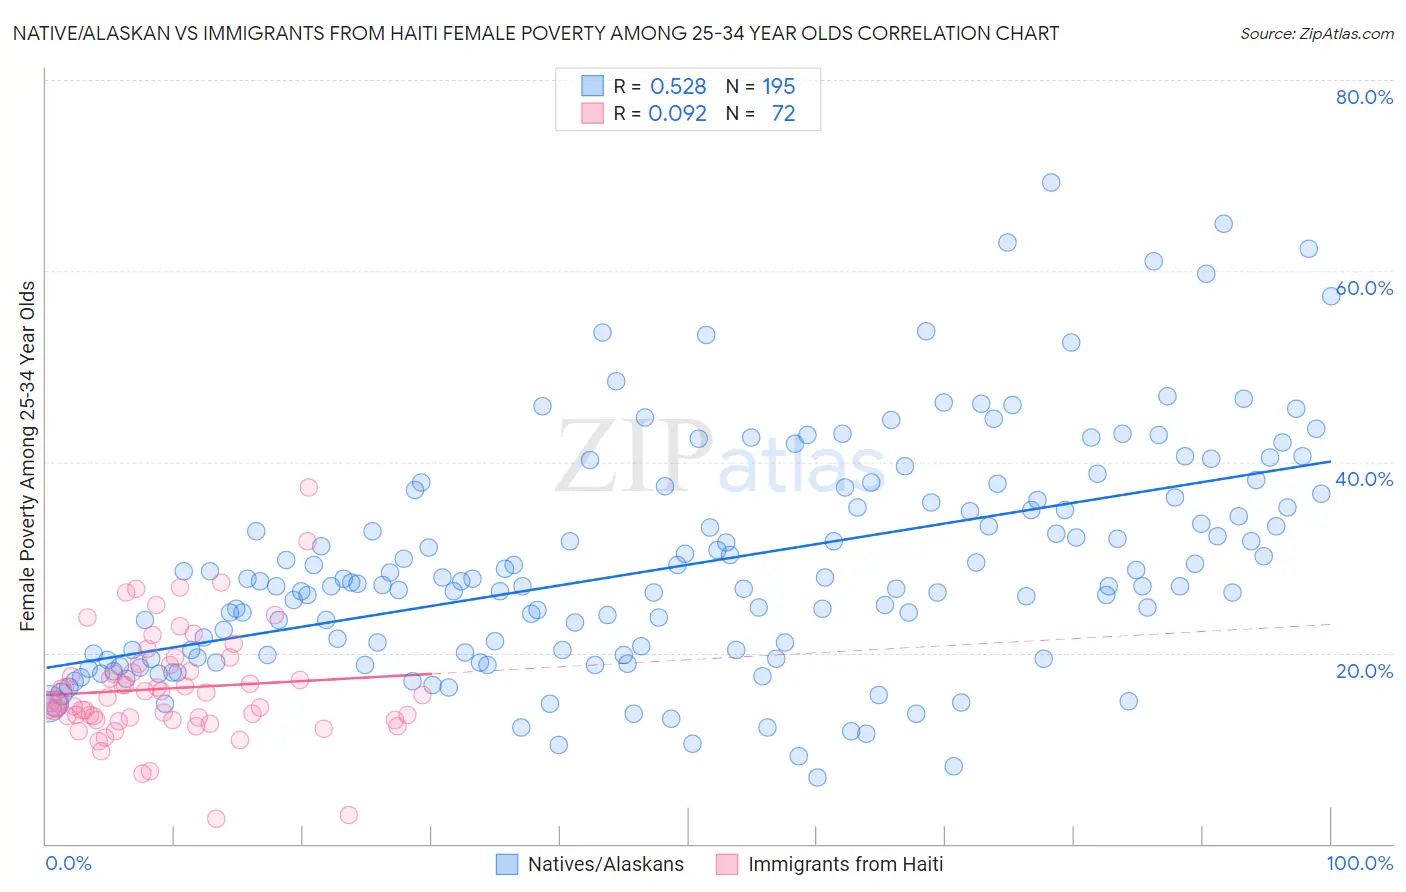 Native/Alaskan vs Immigrants from Haiti Female Poverty Among 25-34 Year Olds